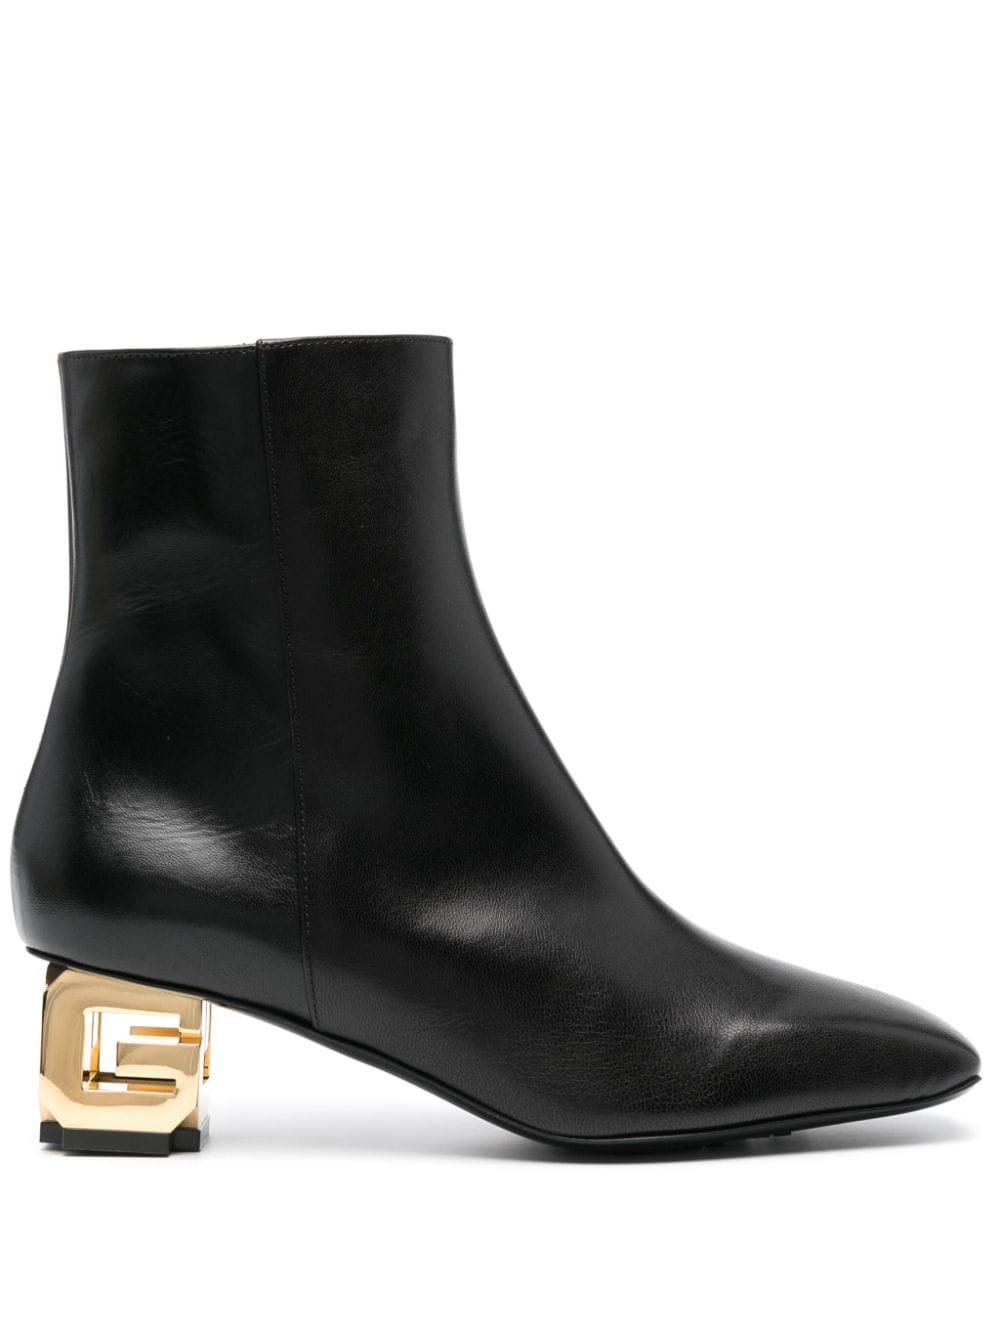 Givenchy 50mm logo-plaque leather boots - Black von Givenchy